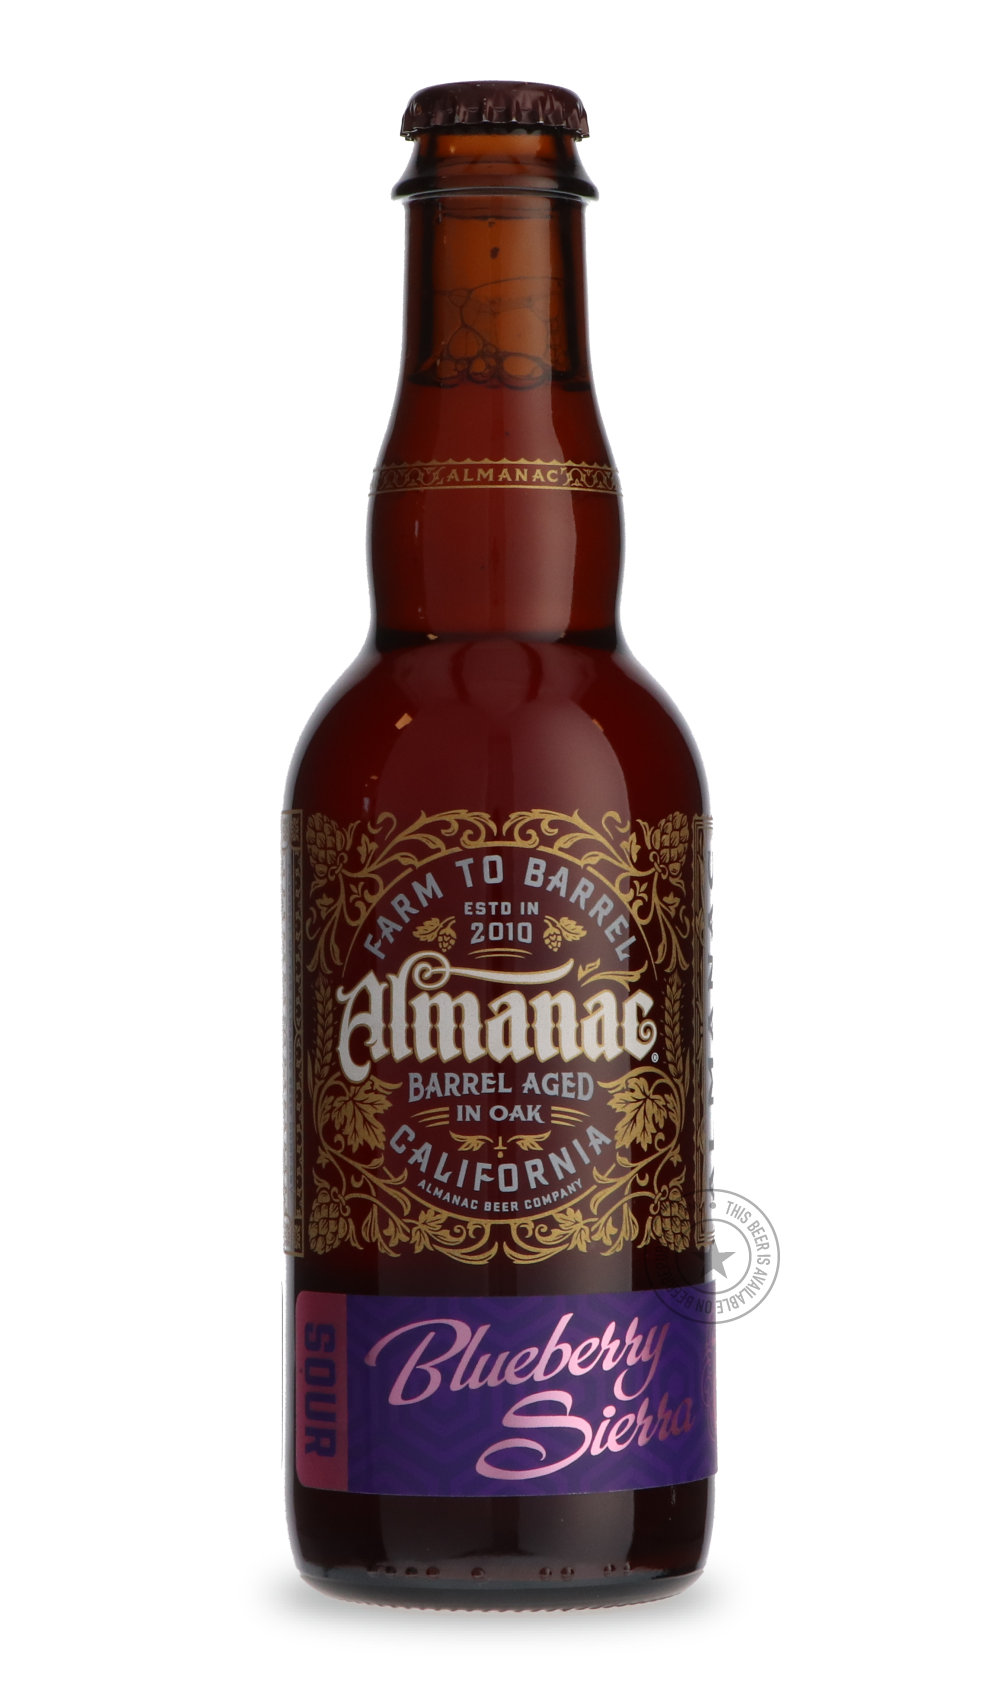 -Almanac- Blueberry Sierra-Sour / Wild & Fruity- Only @ Beer Republic - The best online beer store for American & Canadian craft beer - Buy beer online from the USA and Canada - Bier online kopen - Amerikaans bier kopen - Craft beer store - Craft beer kopen - Amerikanisch bier kaufen - Bier online kaufen - Acheter biere online - IPA - Stout - Porter - New England IPA - Hazy IPA - Imperial Stout - Barrel Aged - Barrel Aged Imperial Stout - Brown - Dark beer - Blond - Blonde - Pilsner - Lager - Wheat - Weizen